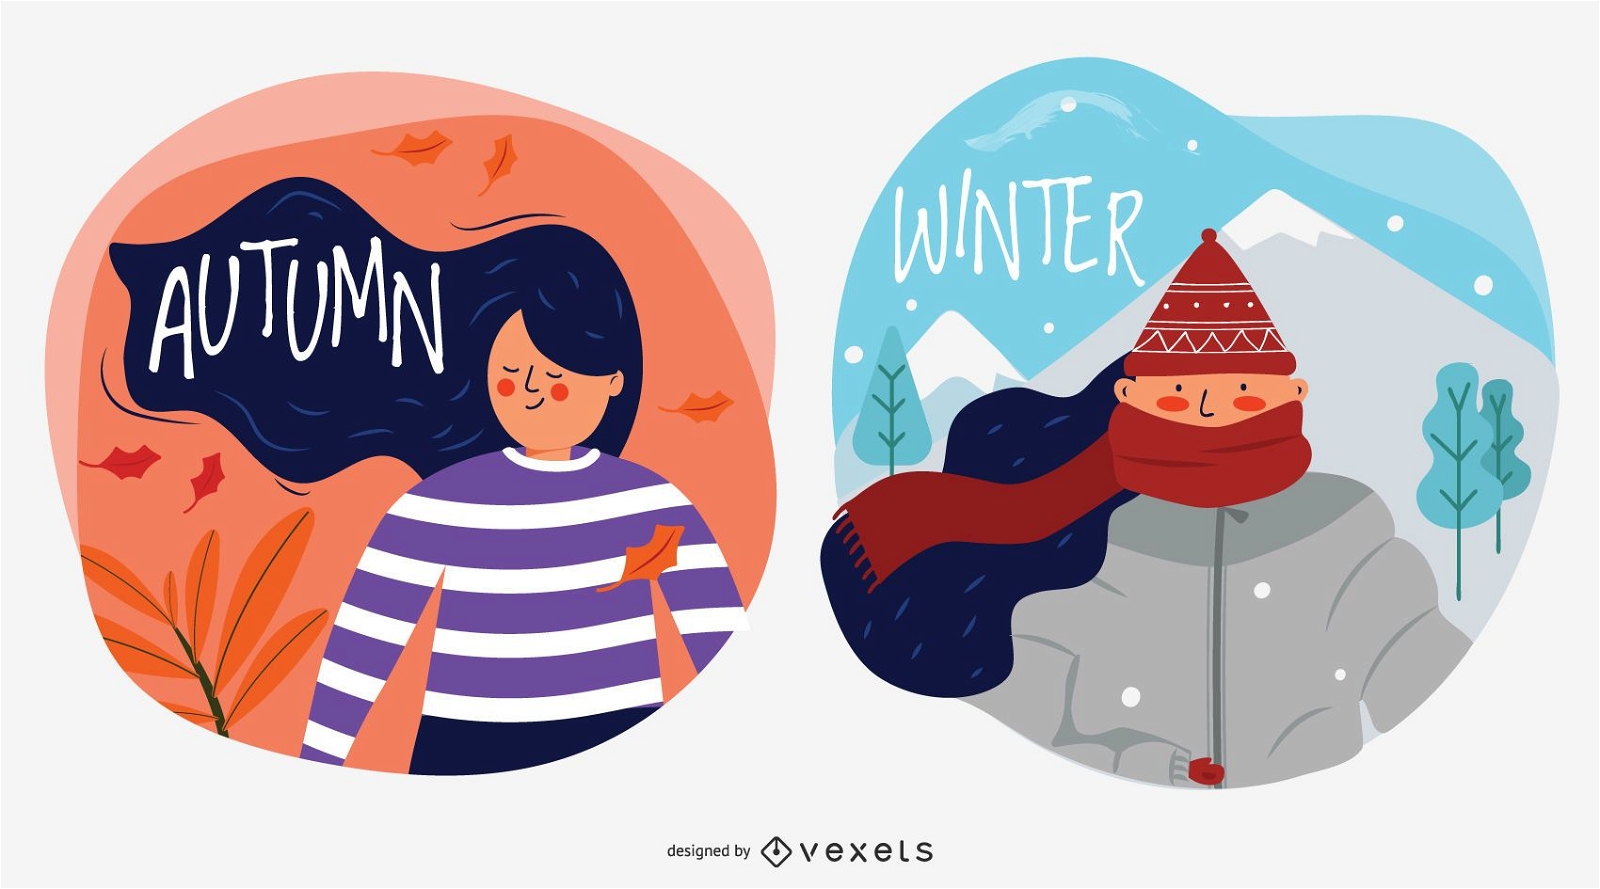 Autumn and Winter Character Vector Illustrations